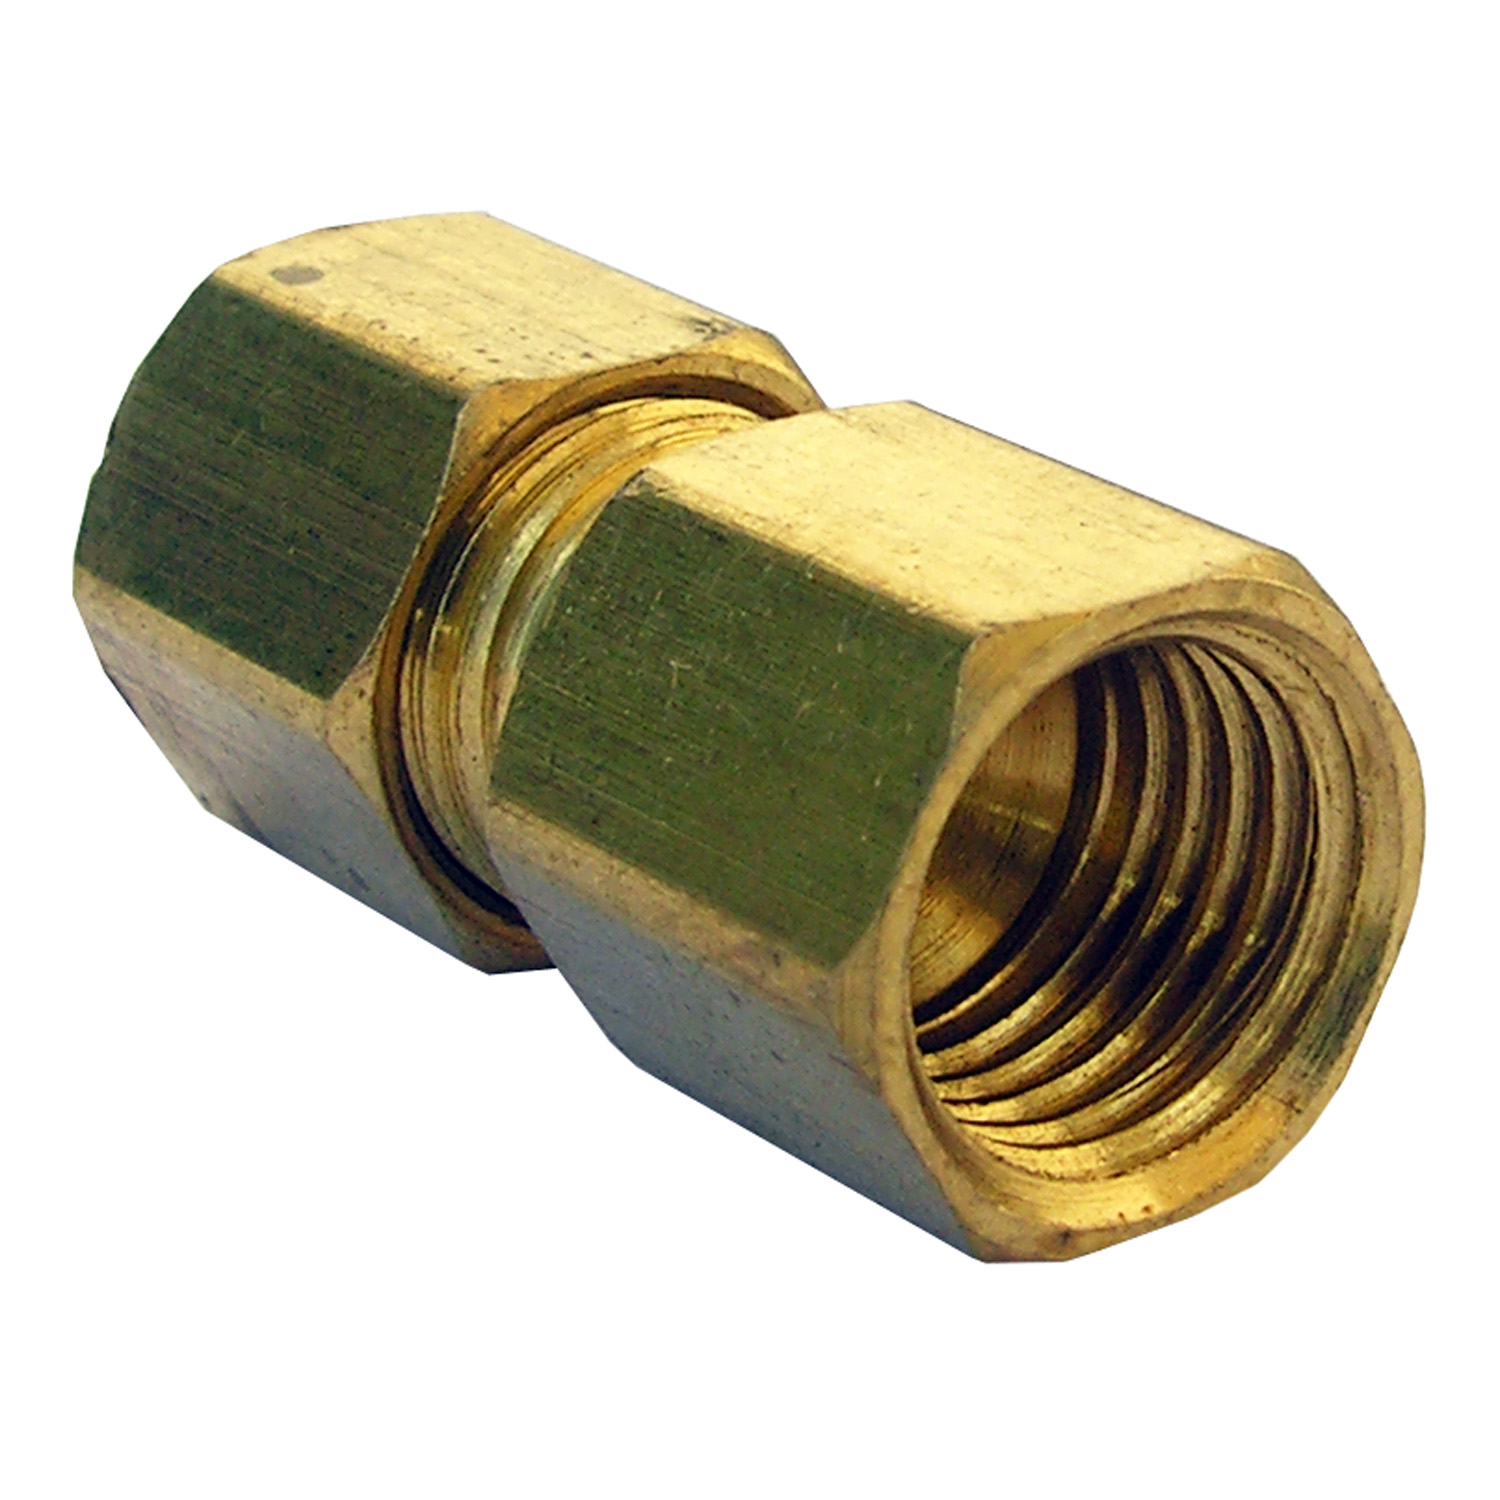 17-6751 Pipe Adapter, 1/4 in, Female Flare x Compression, Brass